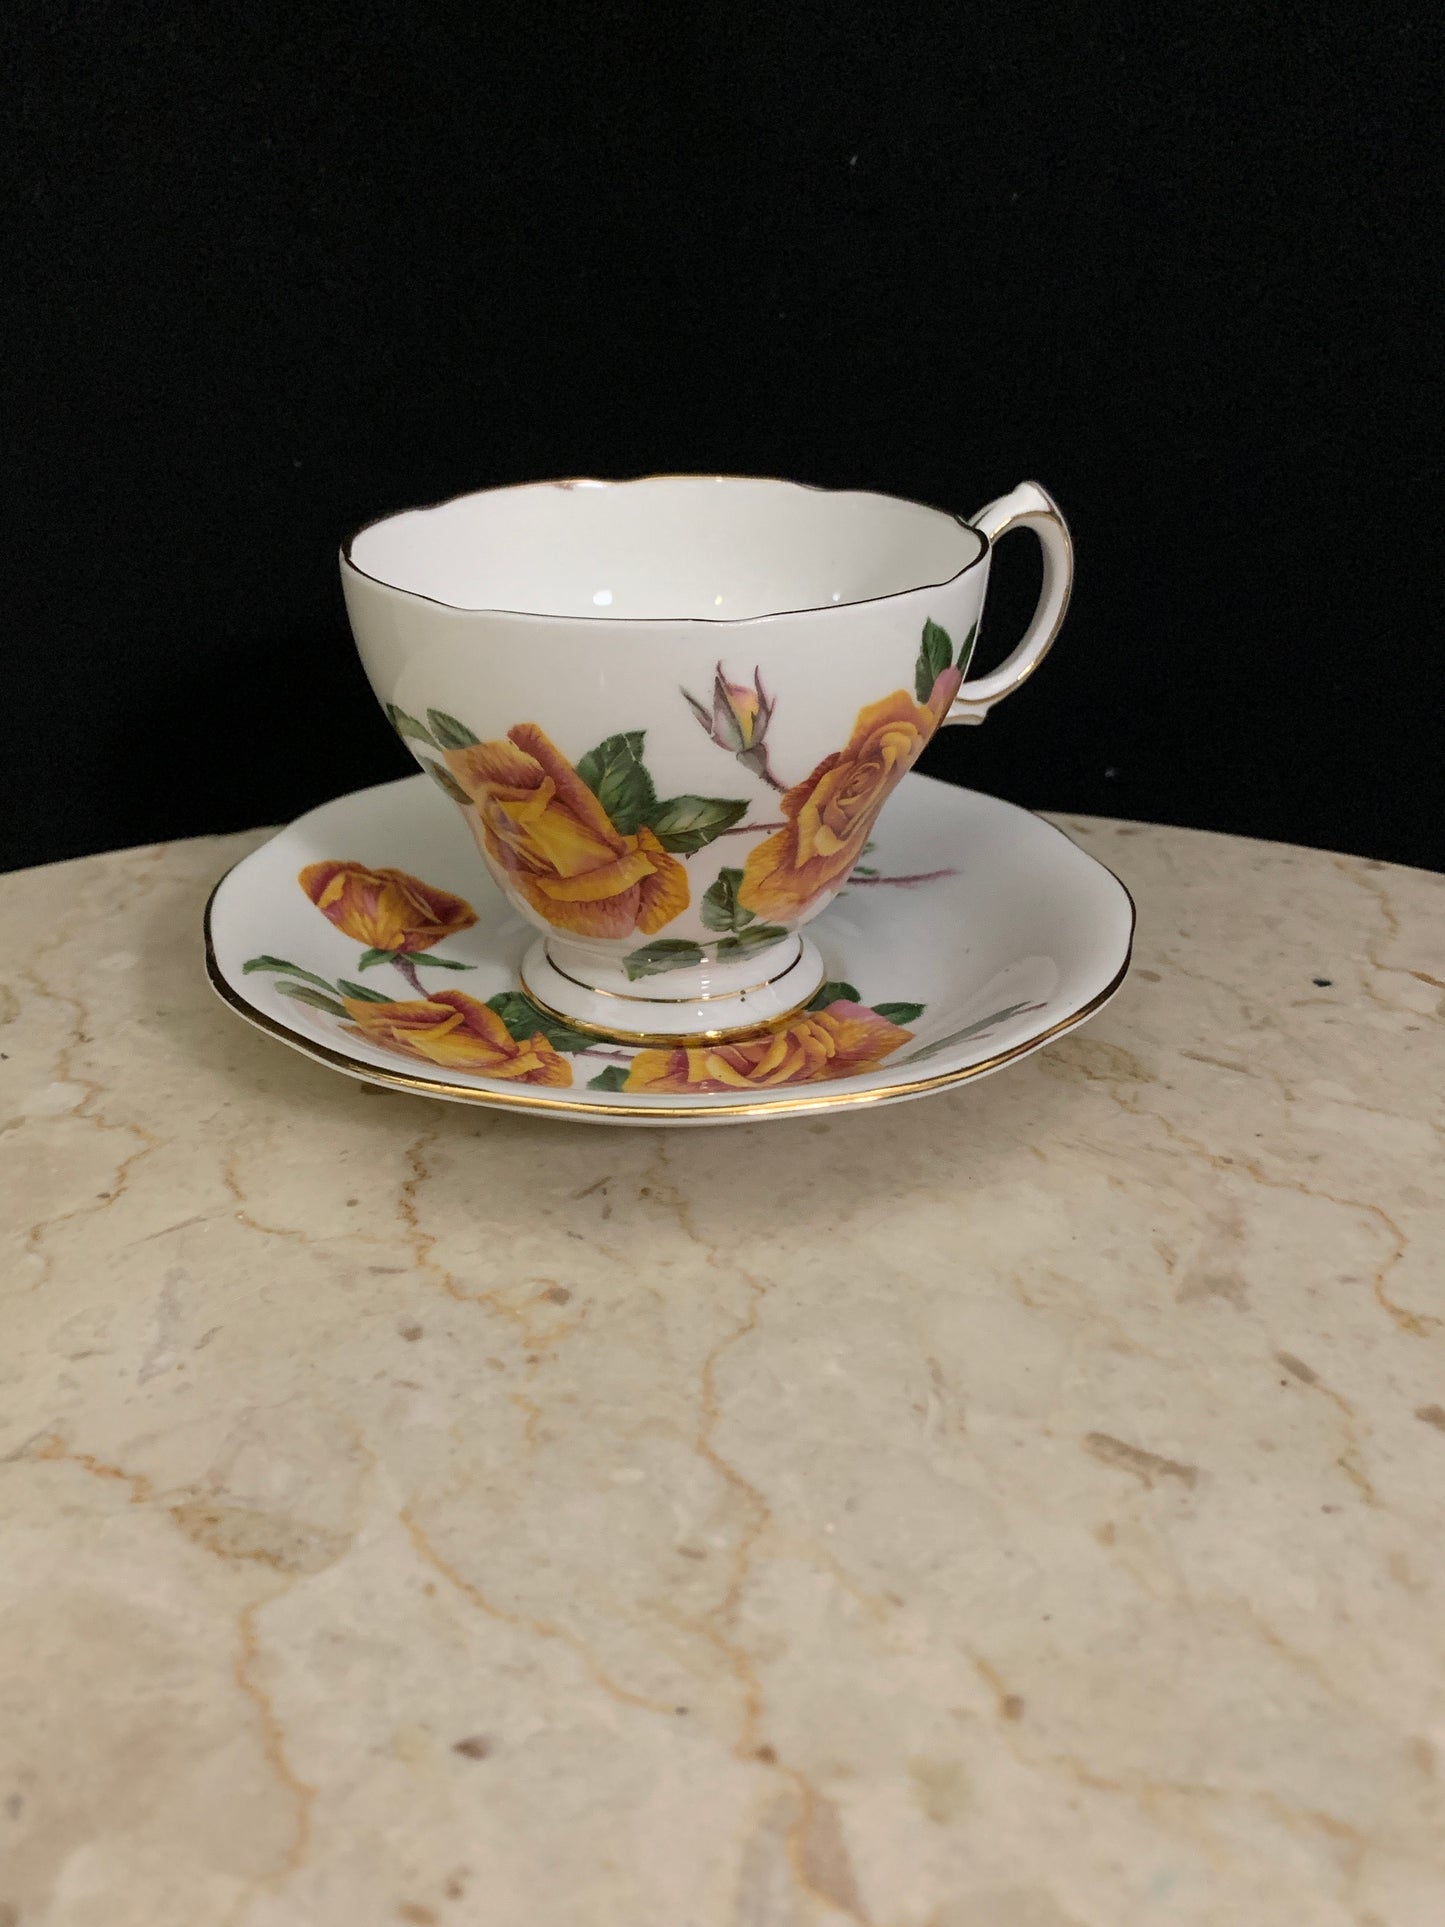 Royal Roses Vintage Tea Cup and Saucer White Teacup with Yellow and Pink Roses